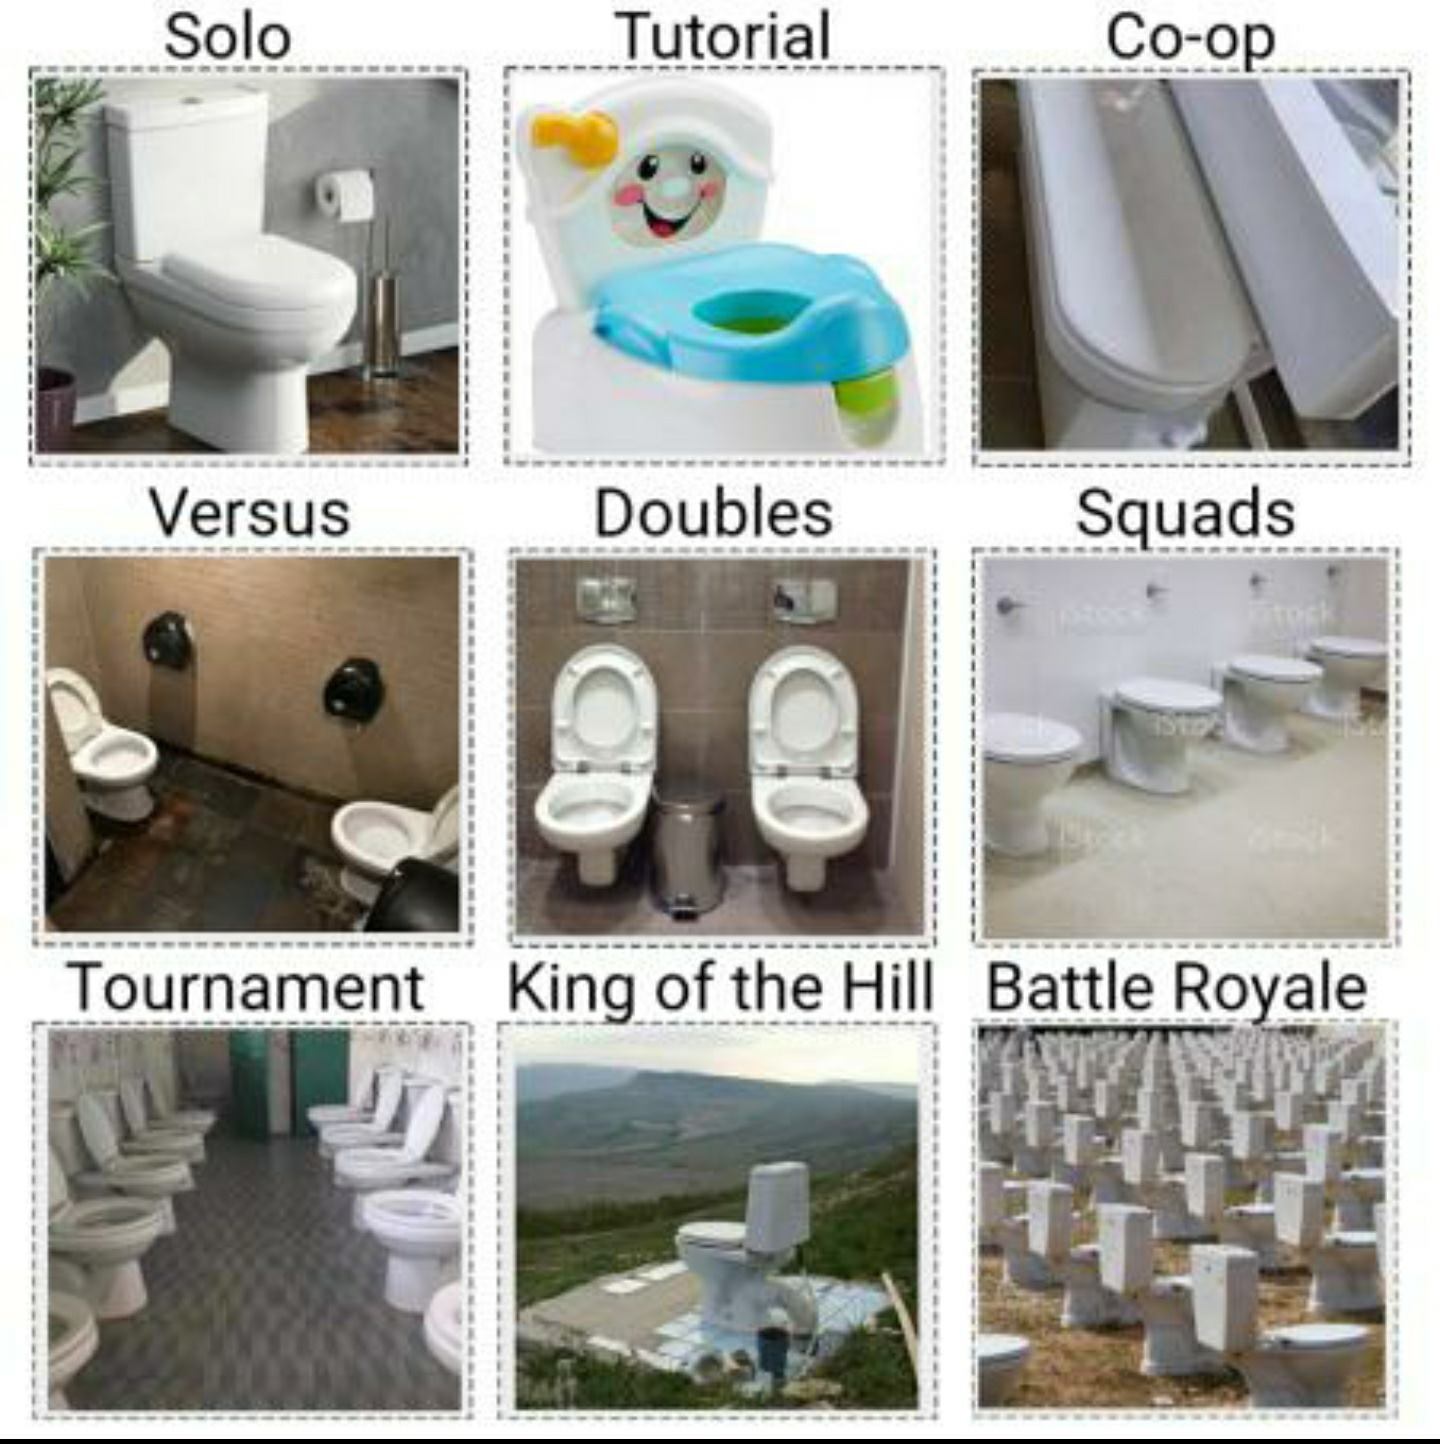 funny gaming memes - know your toilets meme - Solo Tutorial Coop Versus Doubles Squads Tournament King of the Hill Battle Royale